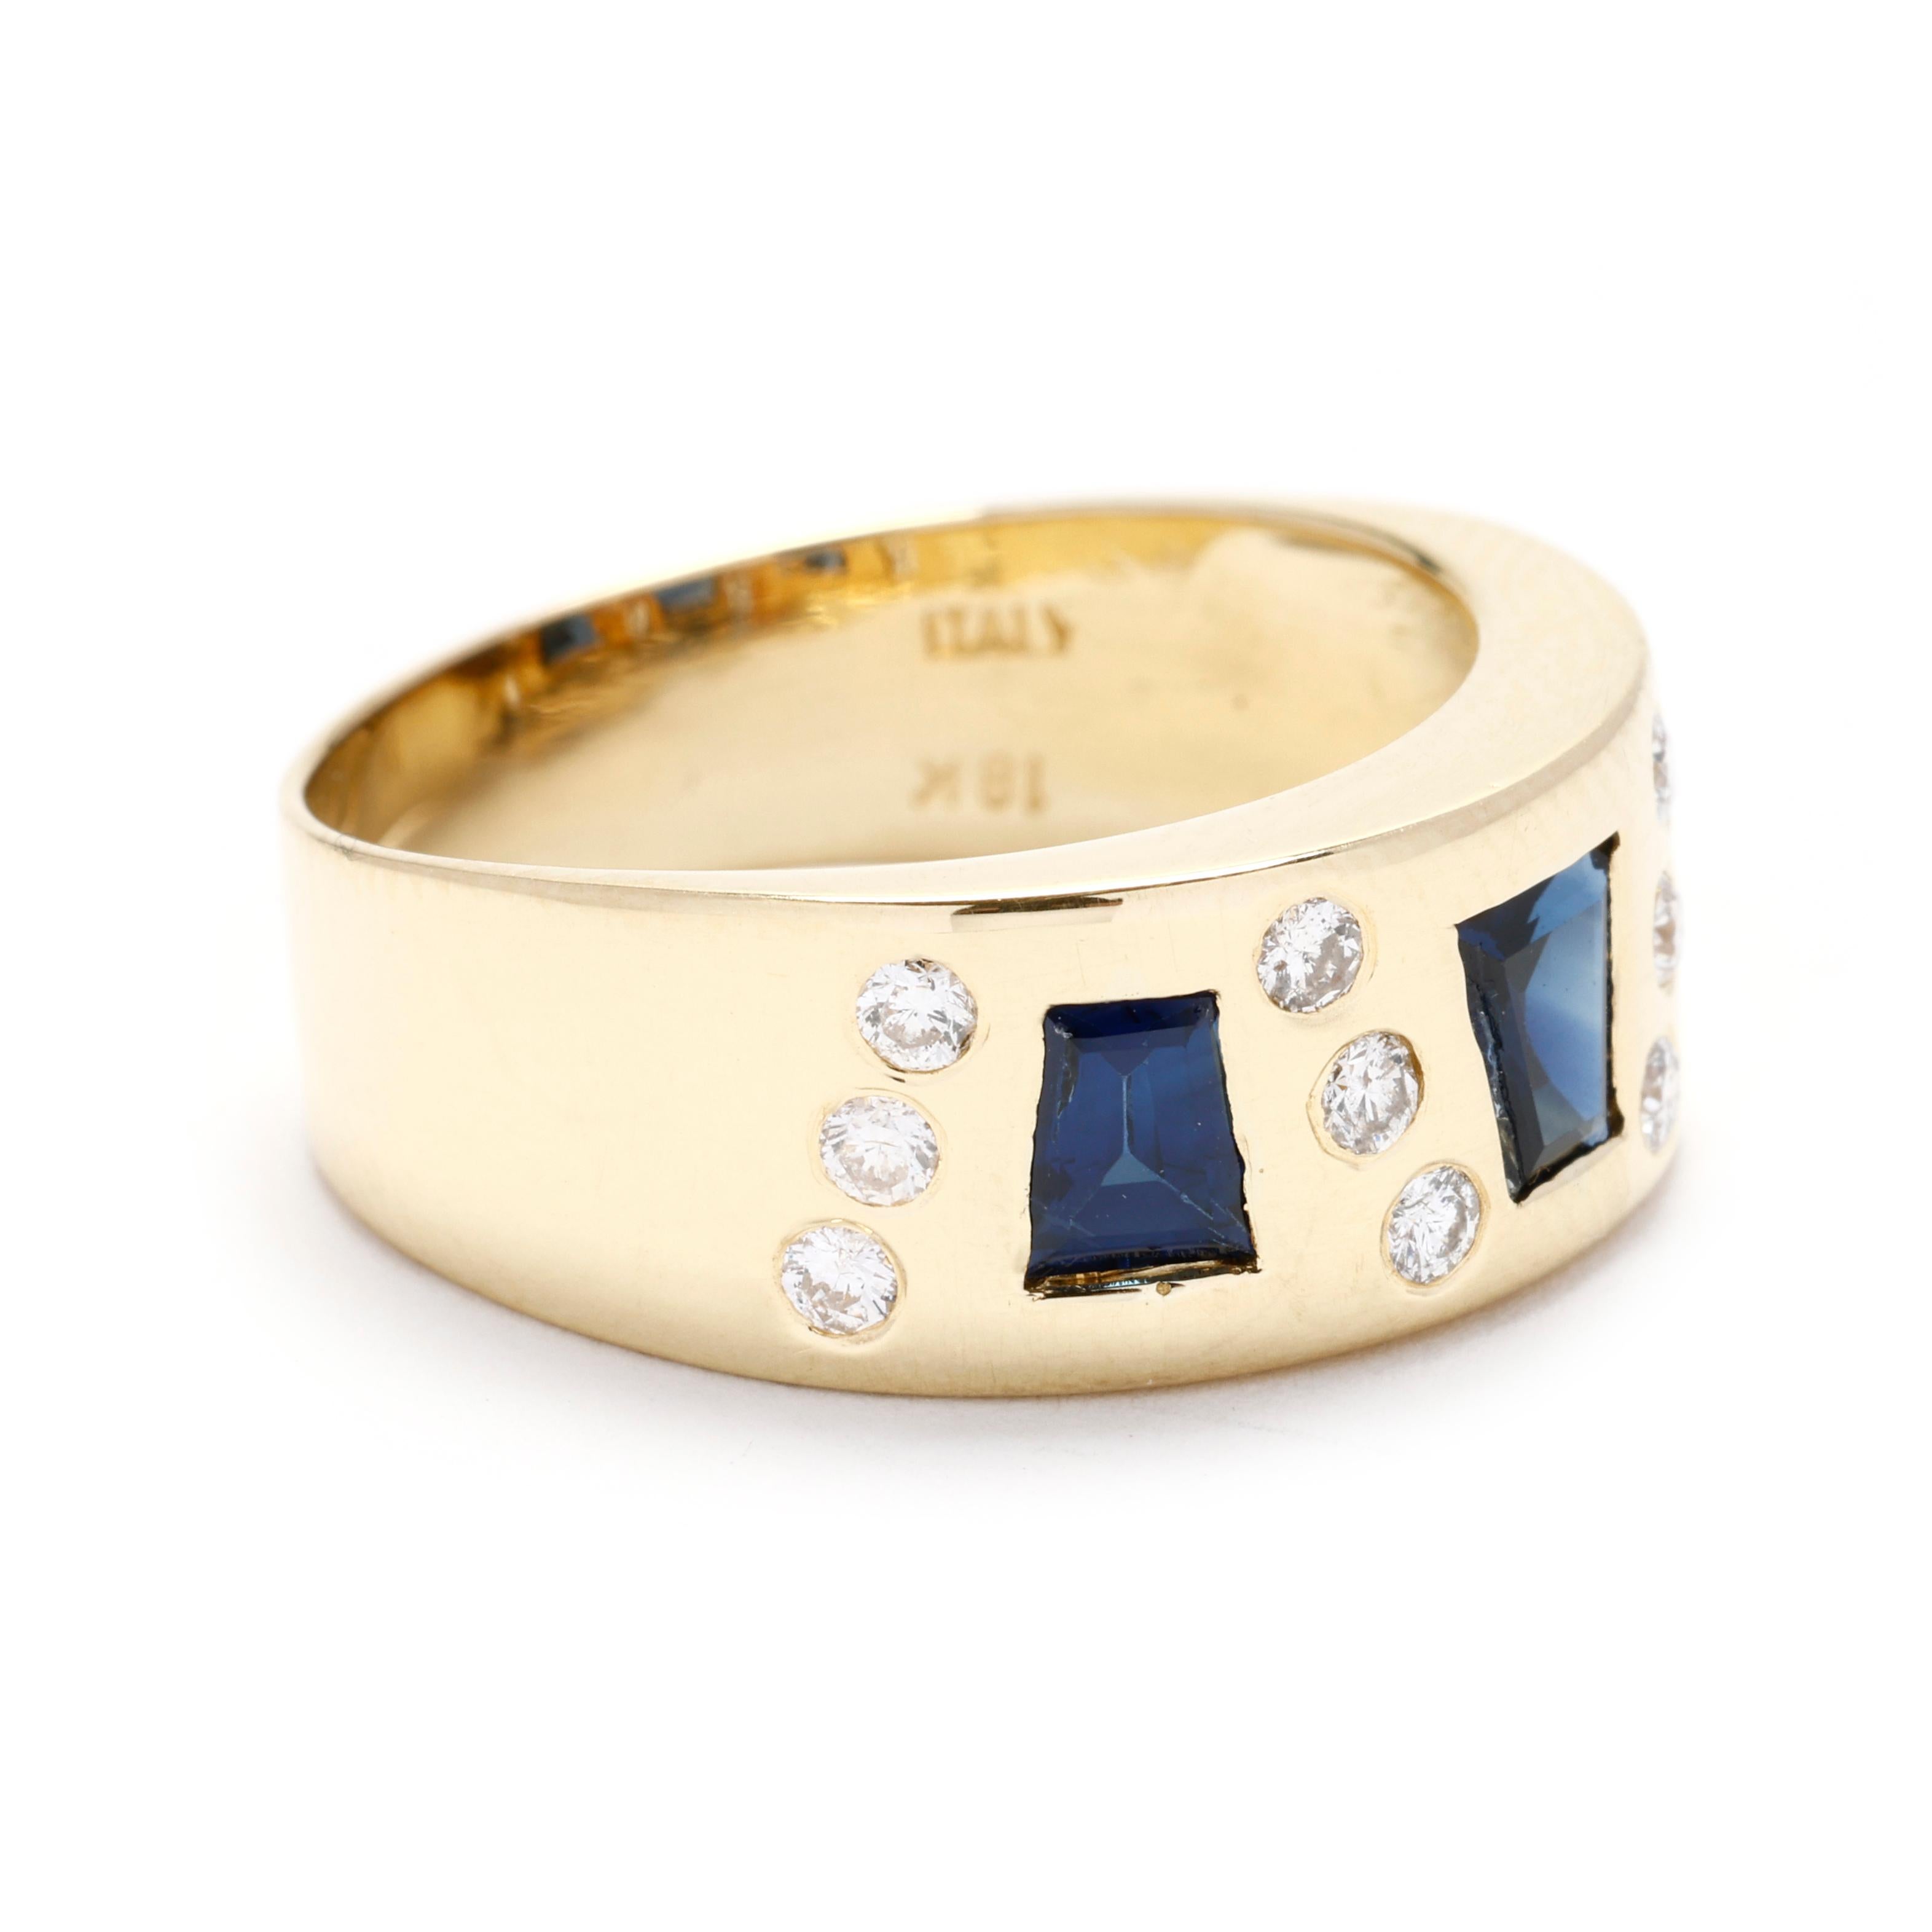 Elevate your style with this luxurious 0.96ct Blue Sapphire and Diamond Thick Band Ring. Meticulously crafted in gleaming 18k yellow gold, this statement ring features a stunning blue sapphire center stone flanked by sparkling round brilliant